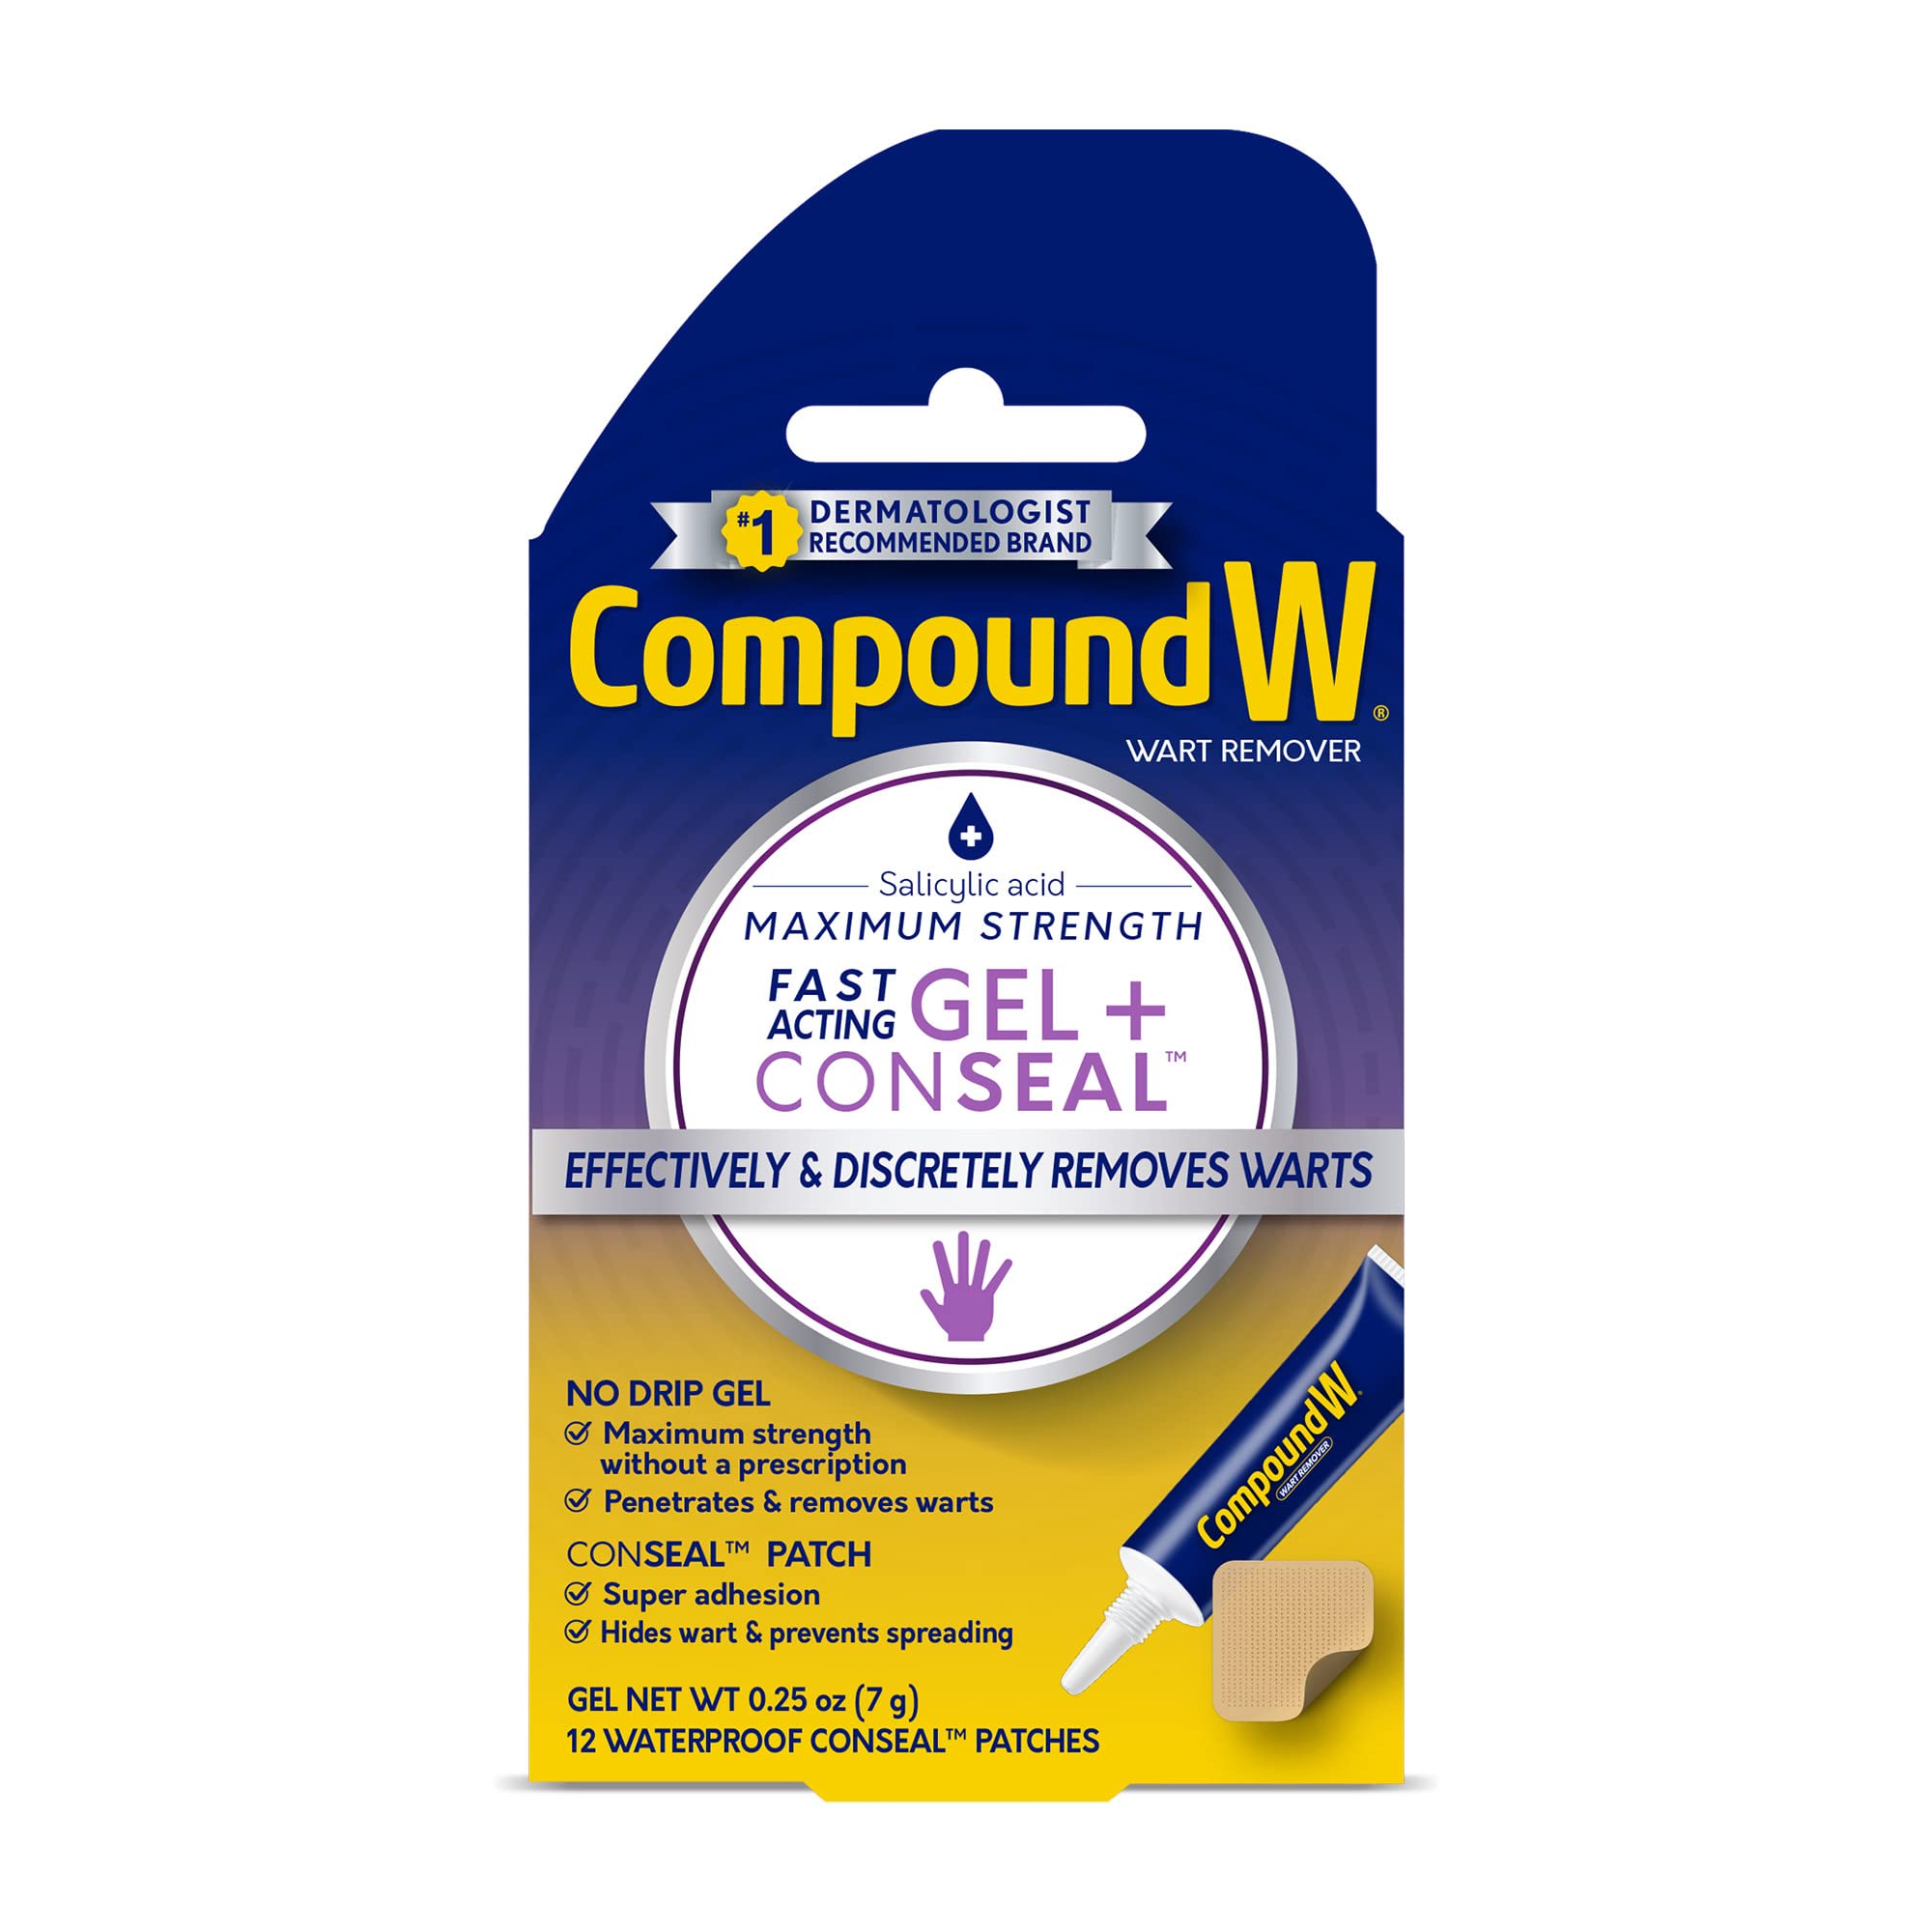 Compound W Maximum Strength Fast Acting Gel Wart Remover with 12 ConSeal Patches, 0.25 oz